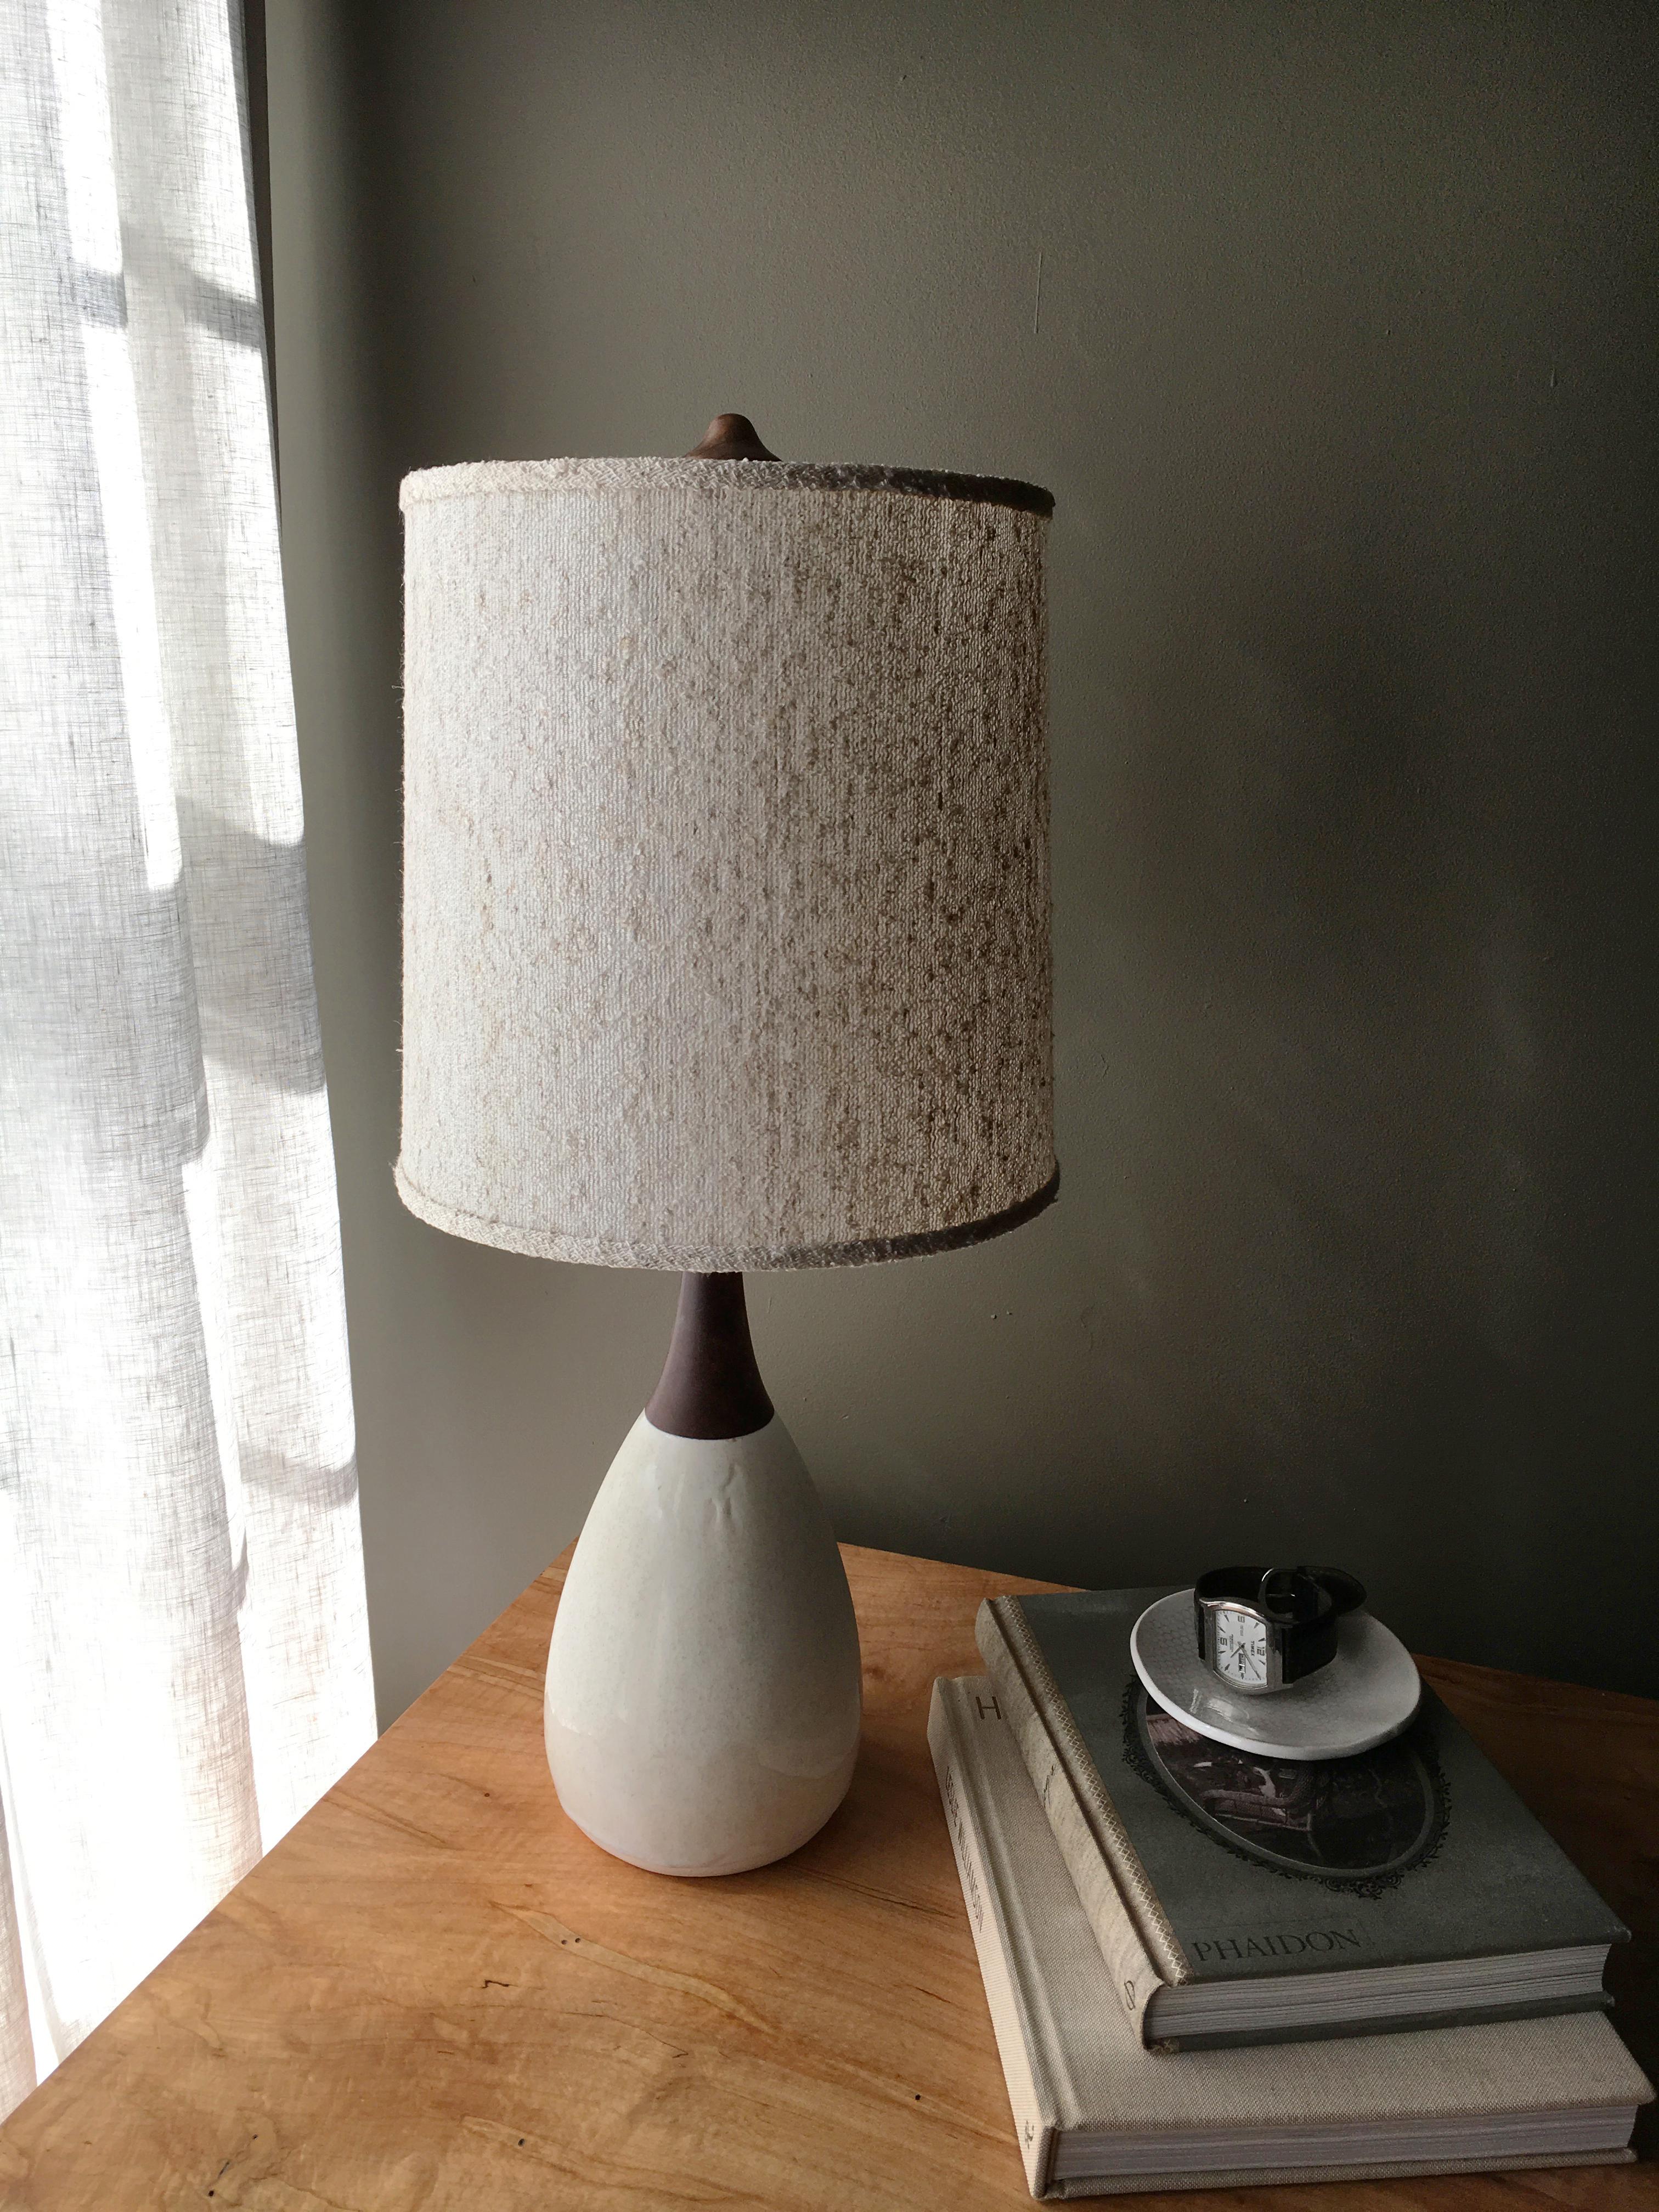 Classic mid-century styling, Esther has a hand poured porcelain base with hand turned walnut neck and finial. The shade is made from a nubbly boucle. Nickel hardware, black cloth cord. Designed by Daniel Oates and Dana Brandwein in 2008. Handmade to